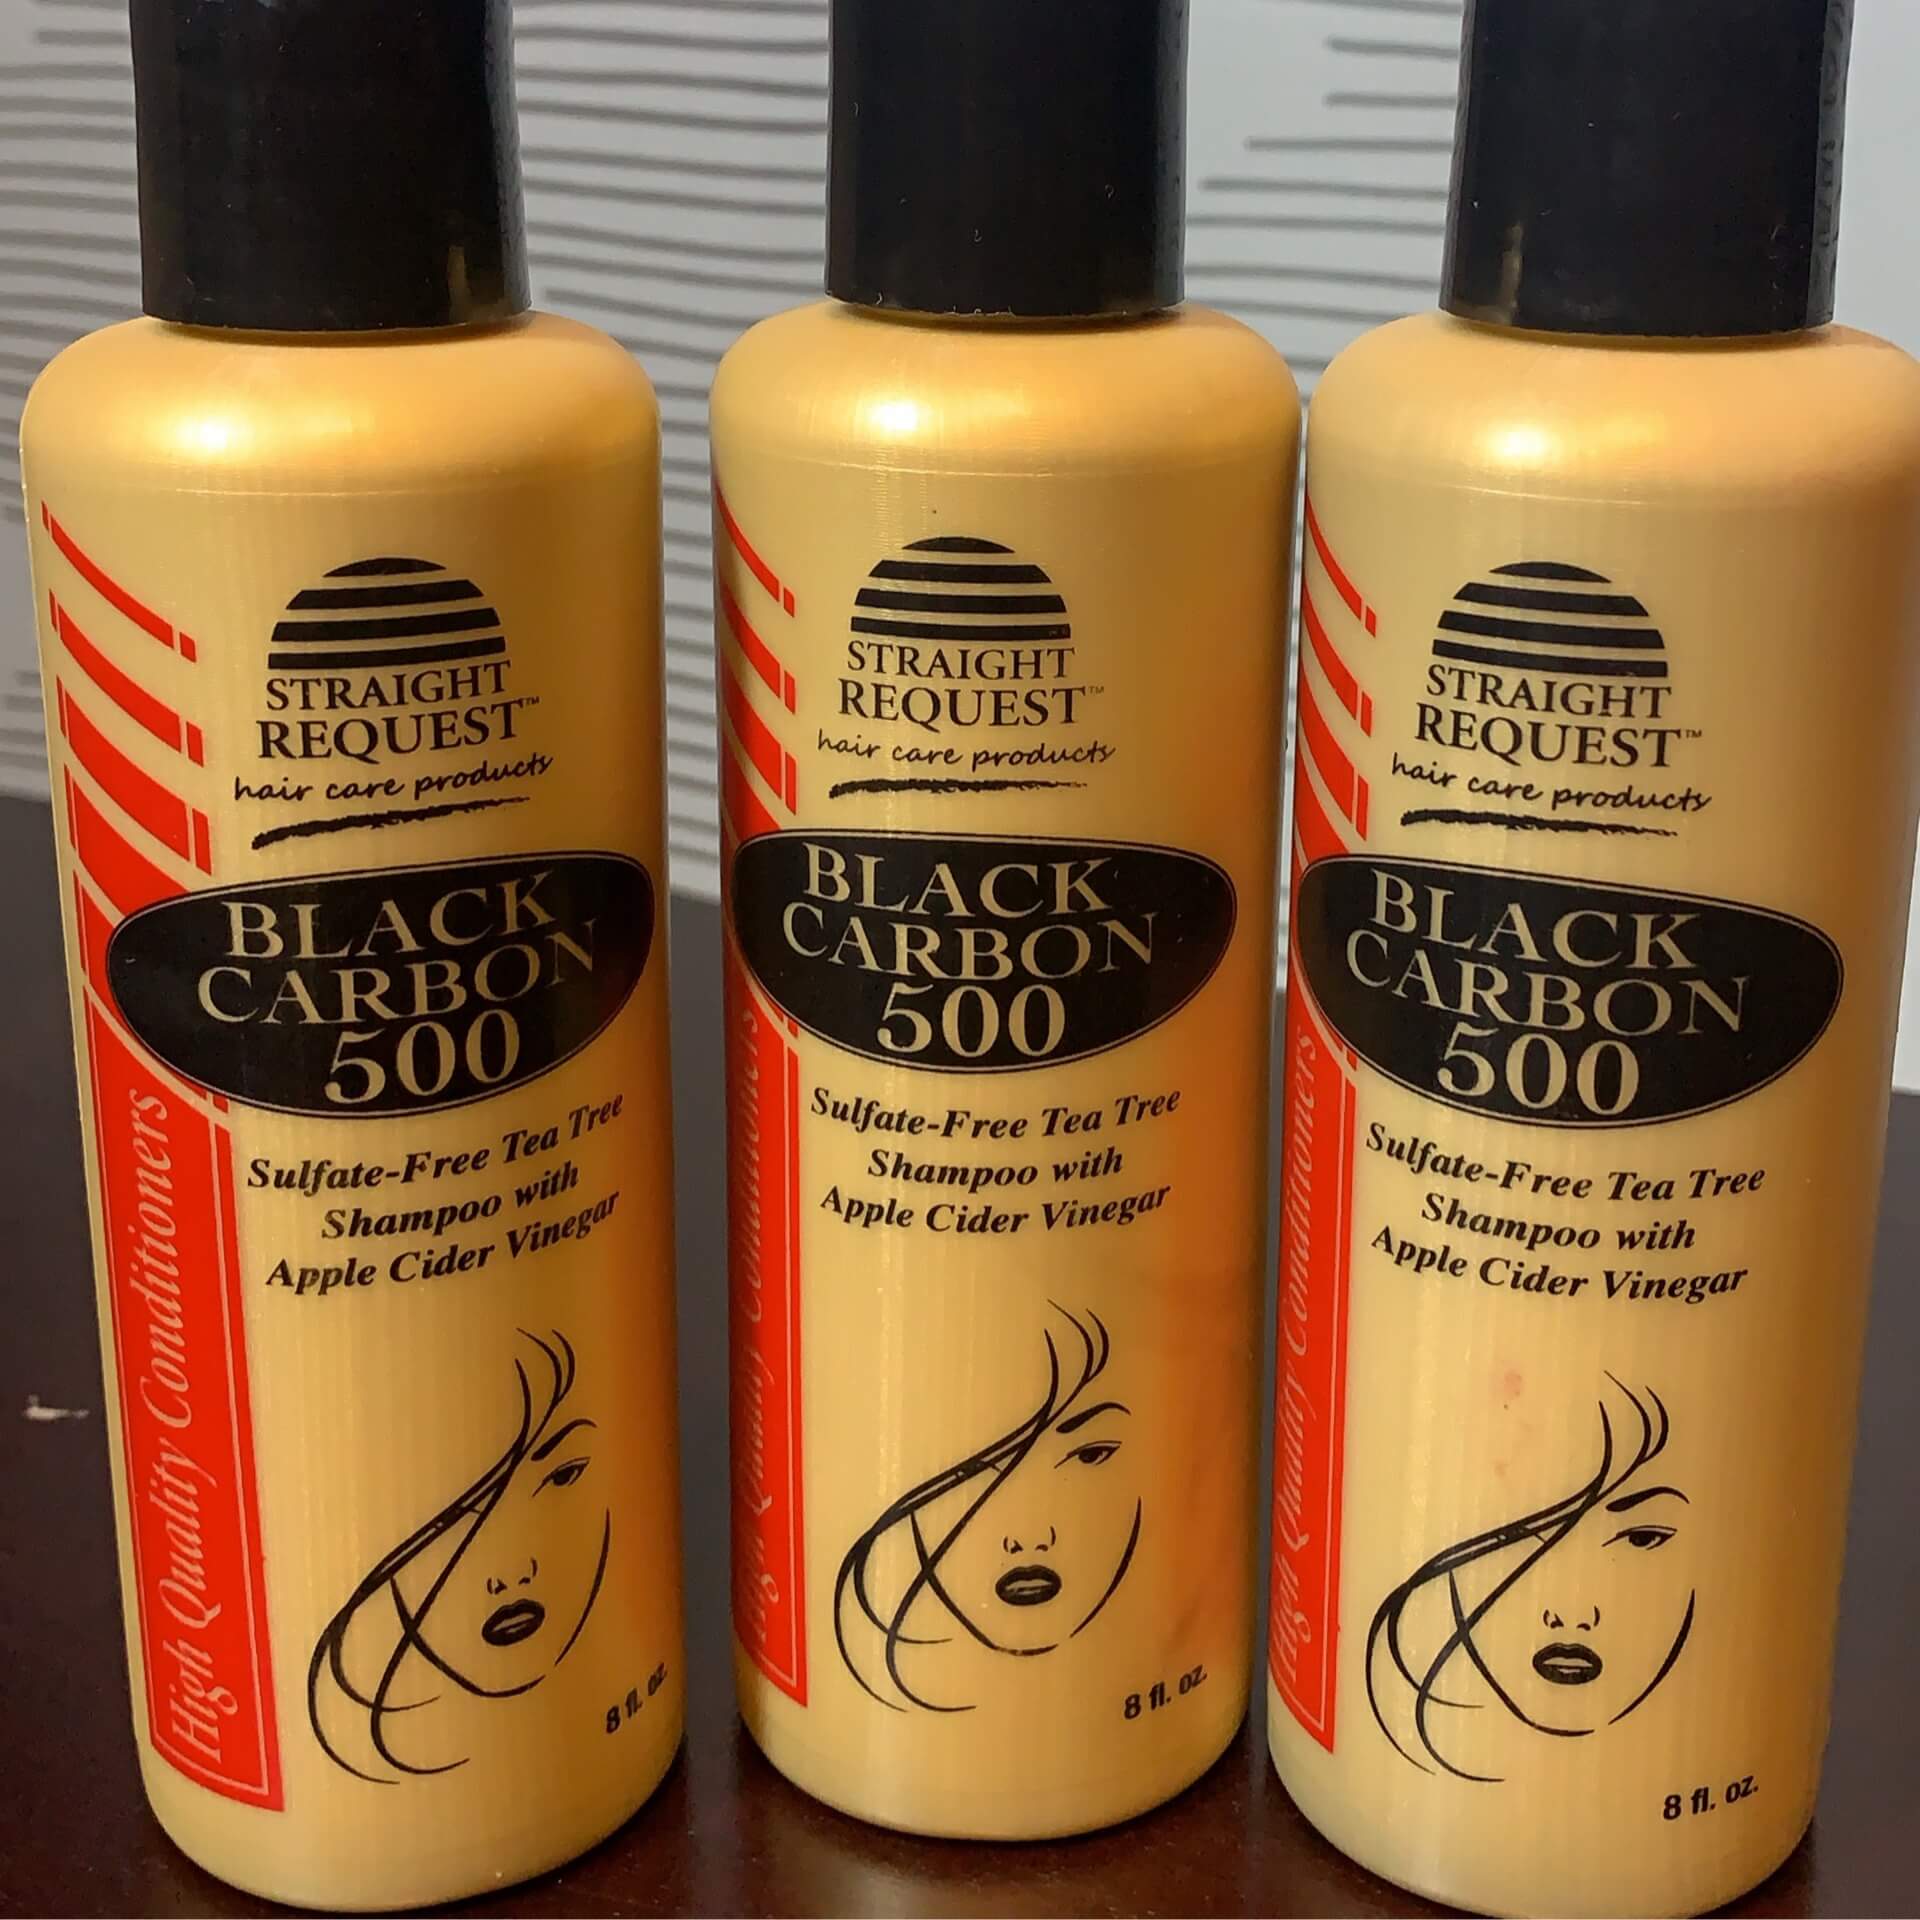 Black Carbon 500 Shampoo Review - Straight Request Hair Products - Inner Beauty Challenge